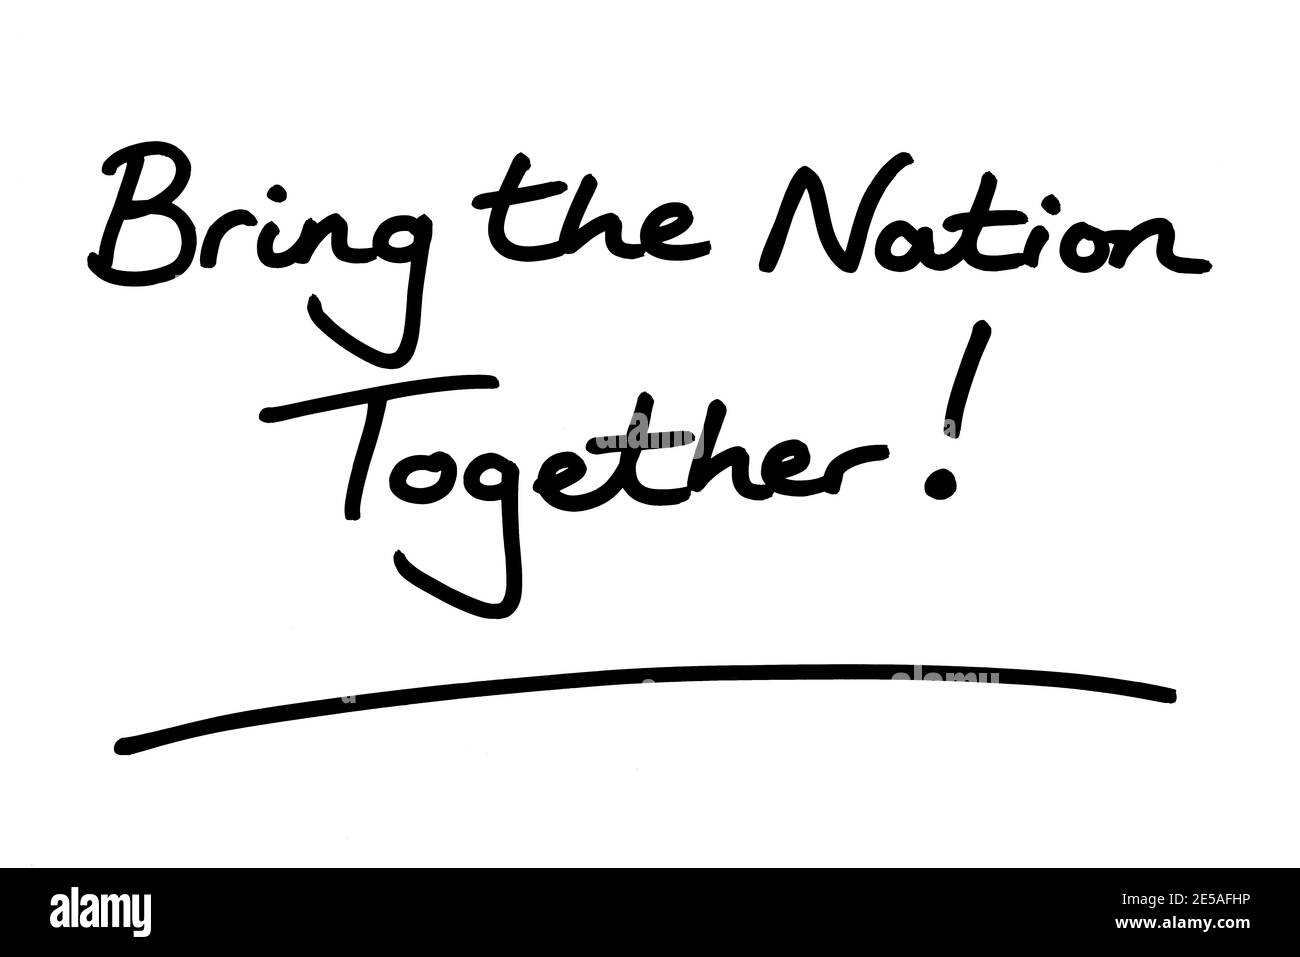 Bring the Nation Together! handwritten on a white background. Stock Photo